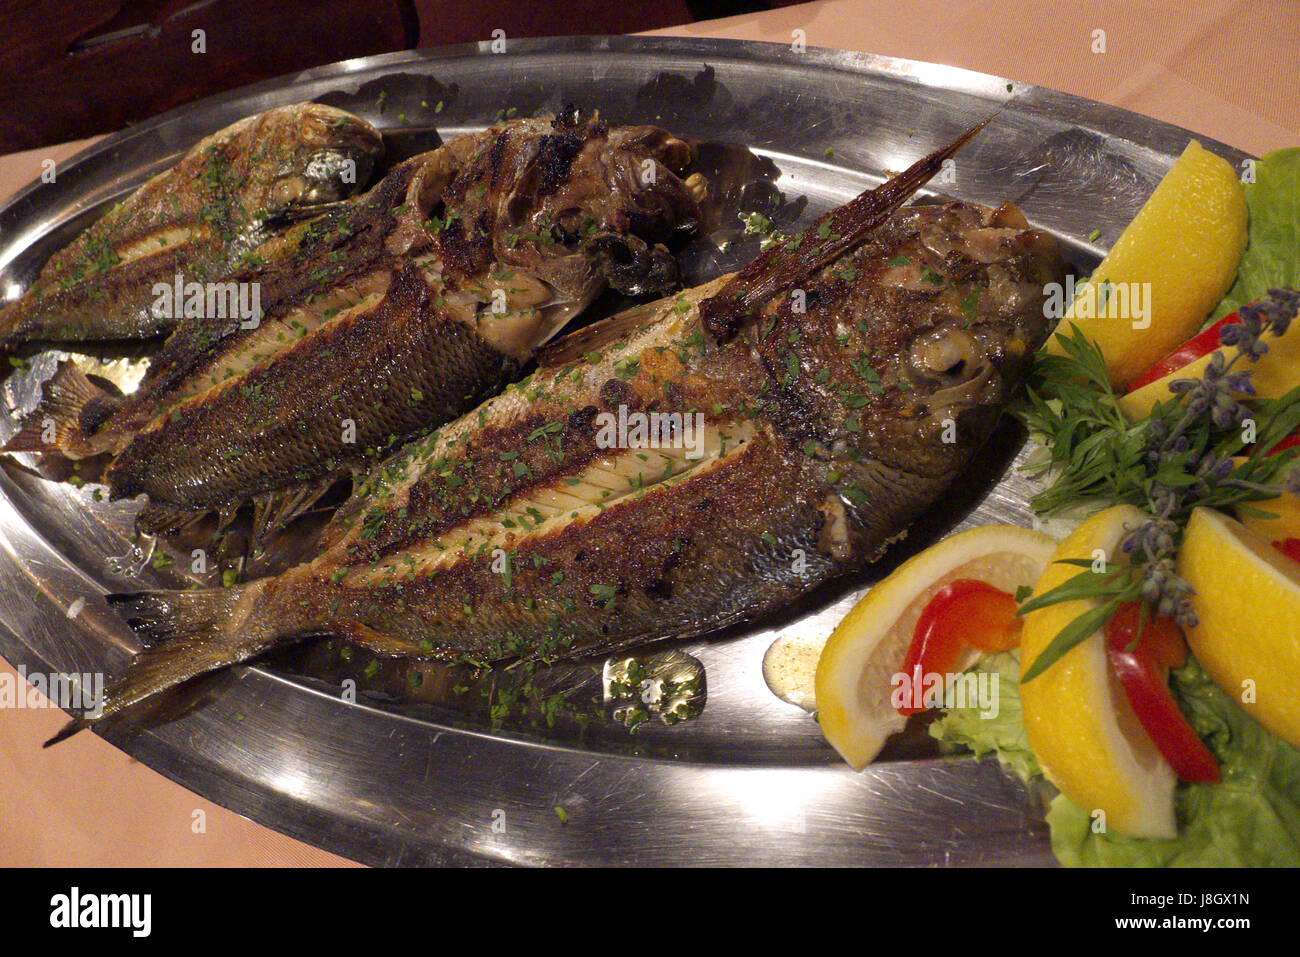 Delicious grilled fish with fresh herbs on a serving platter Stock Photo